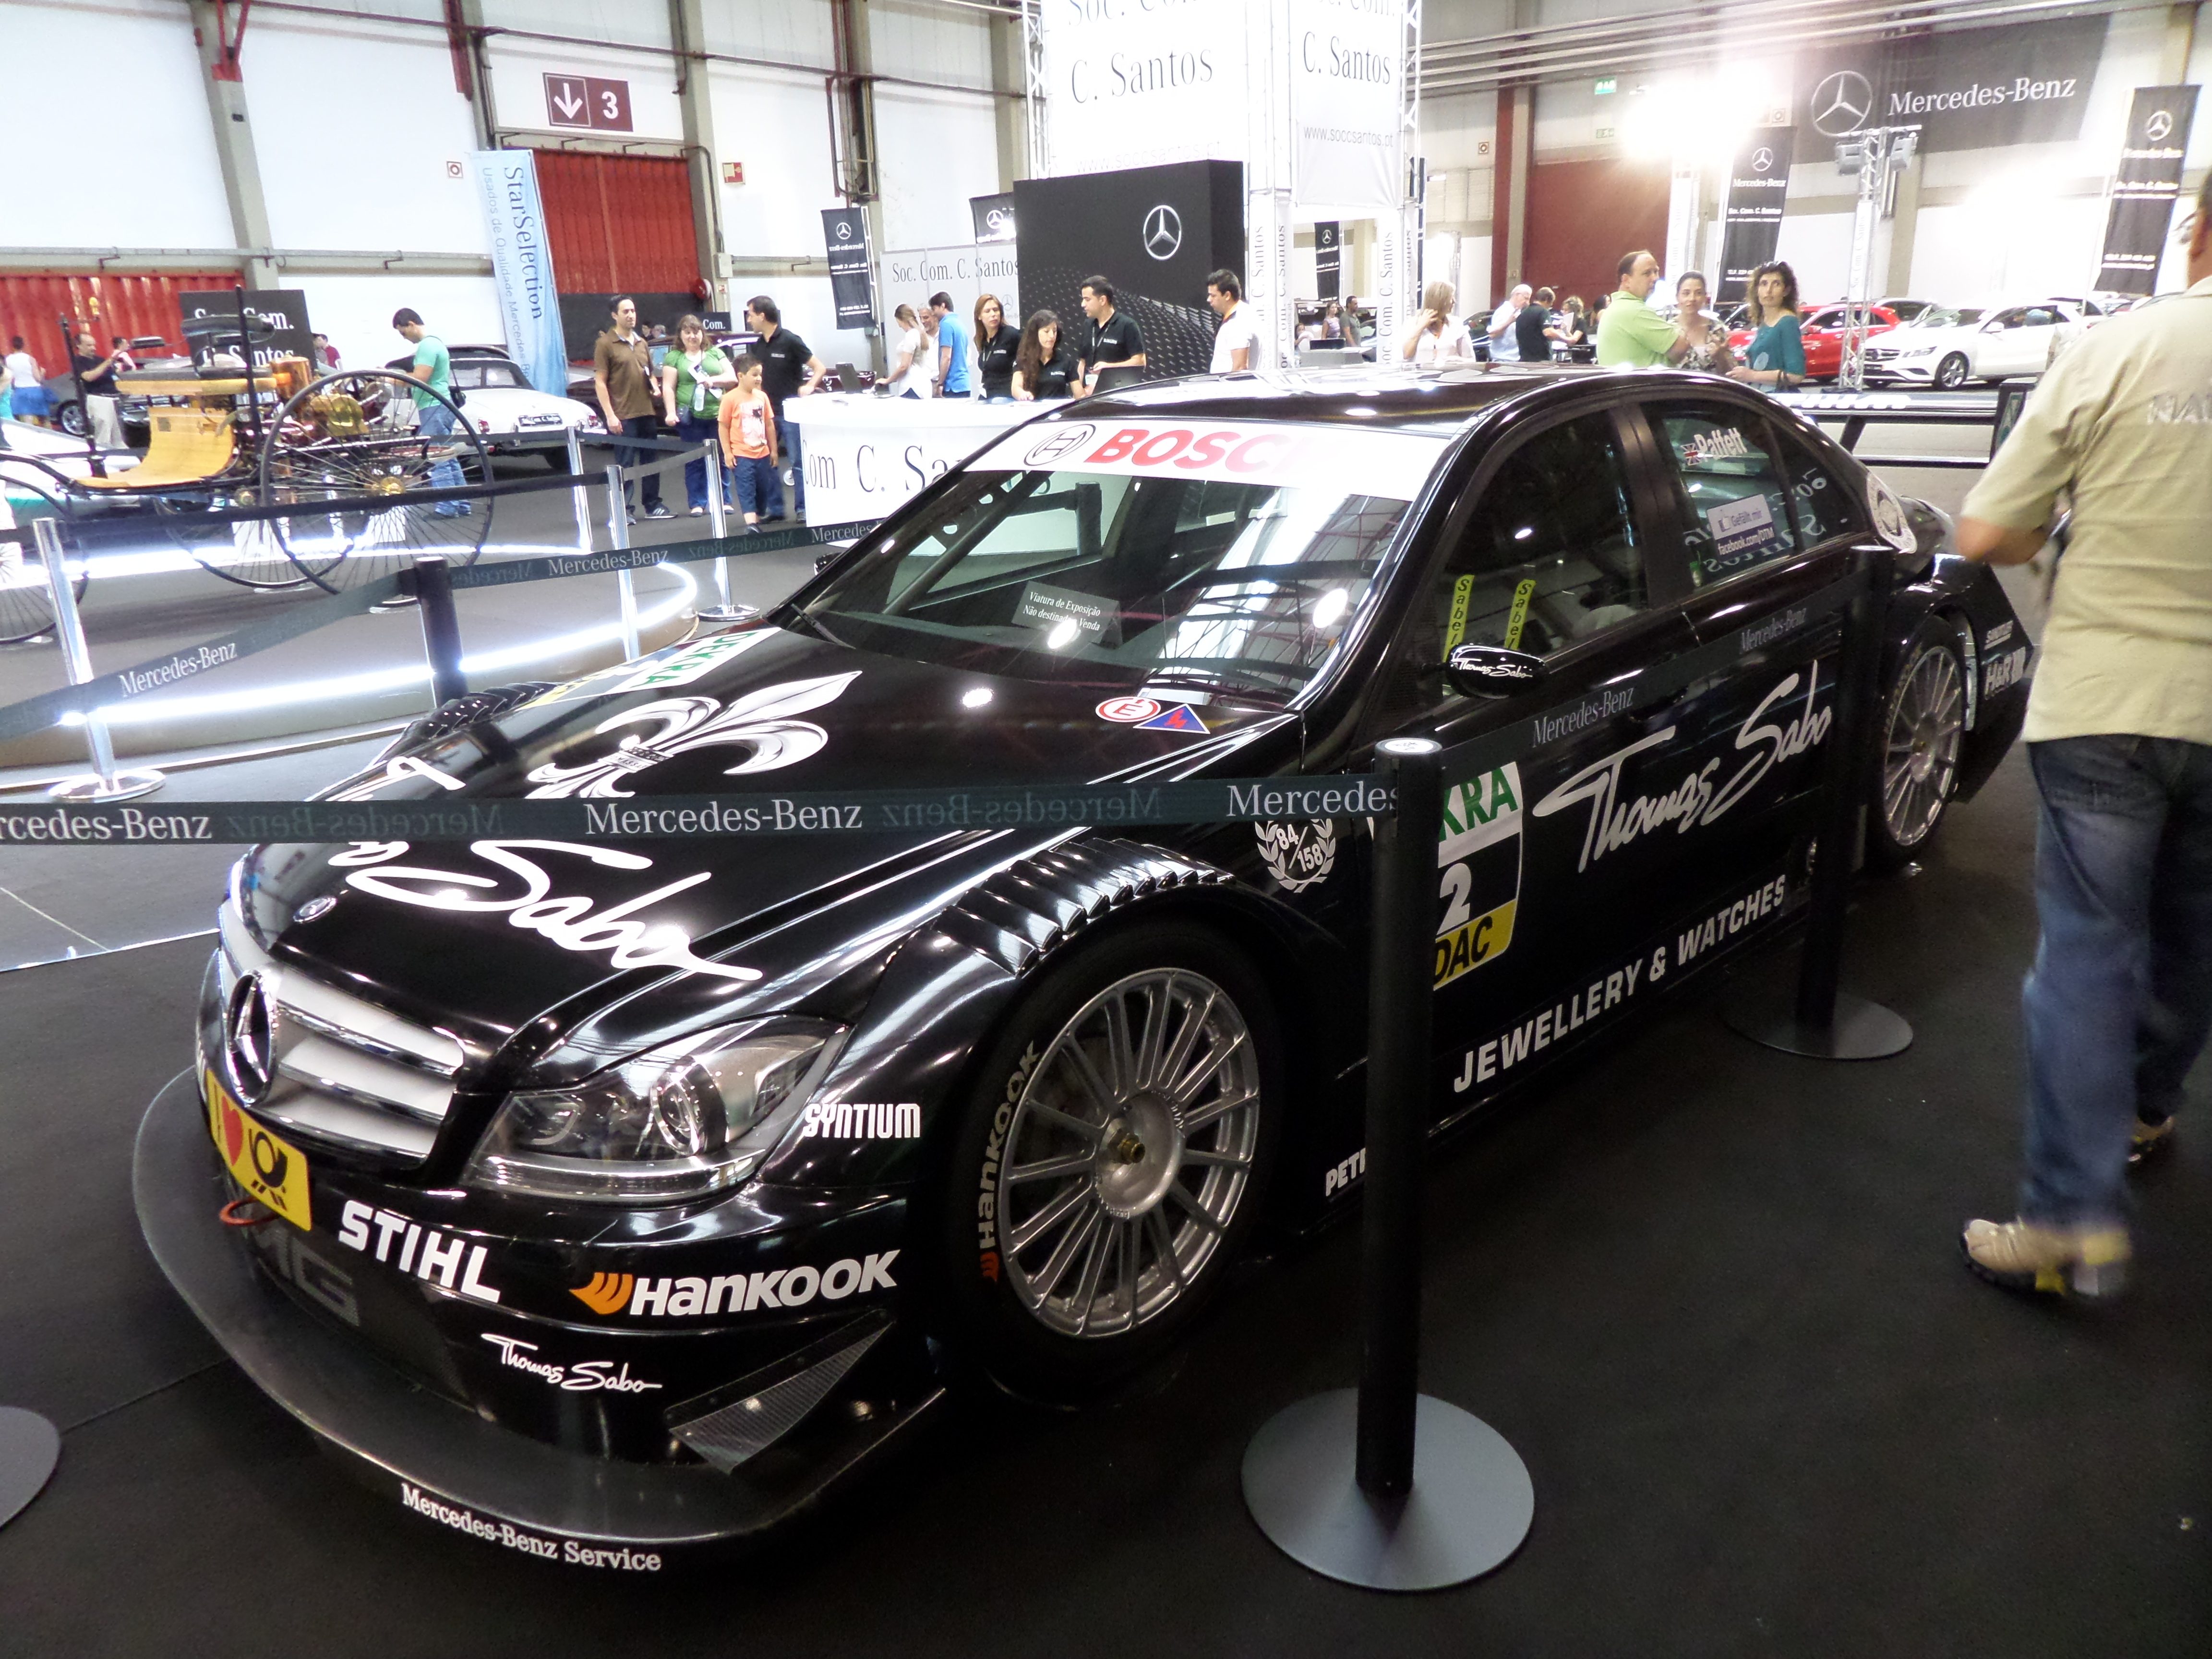 Mercedes C-Class DTM: Oh hey, DTM car out of nowhere.